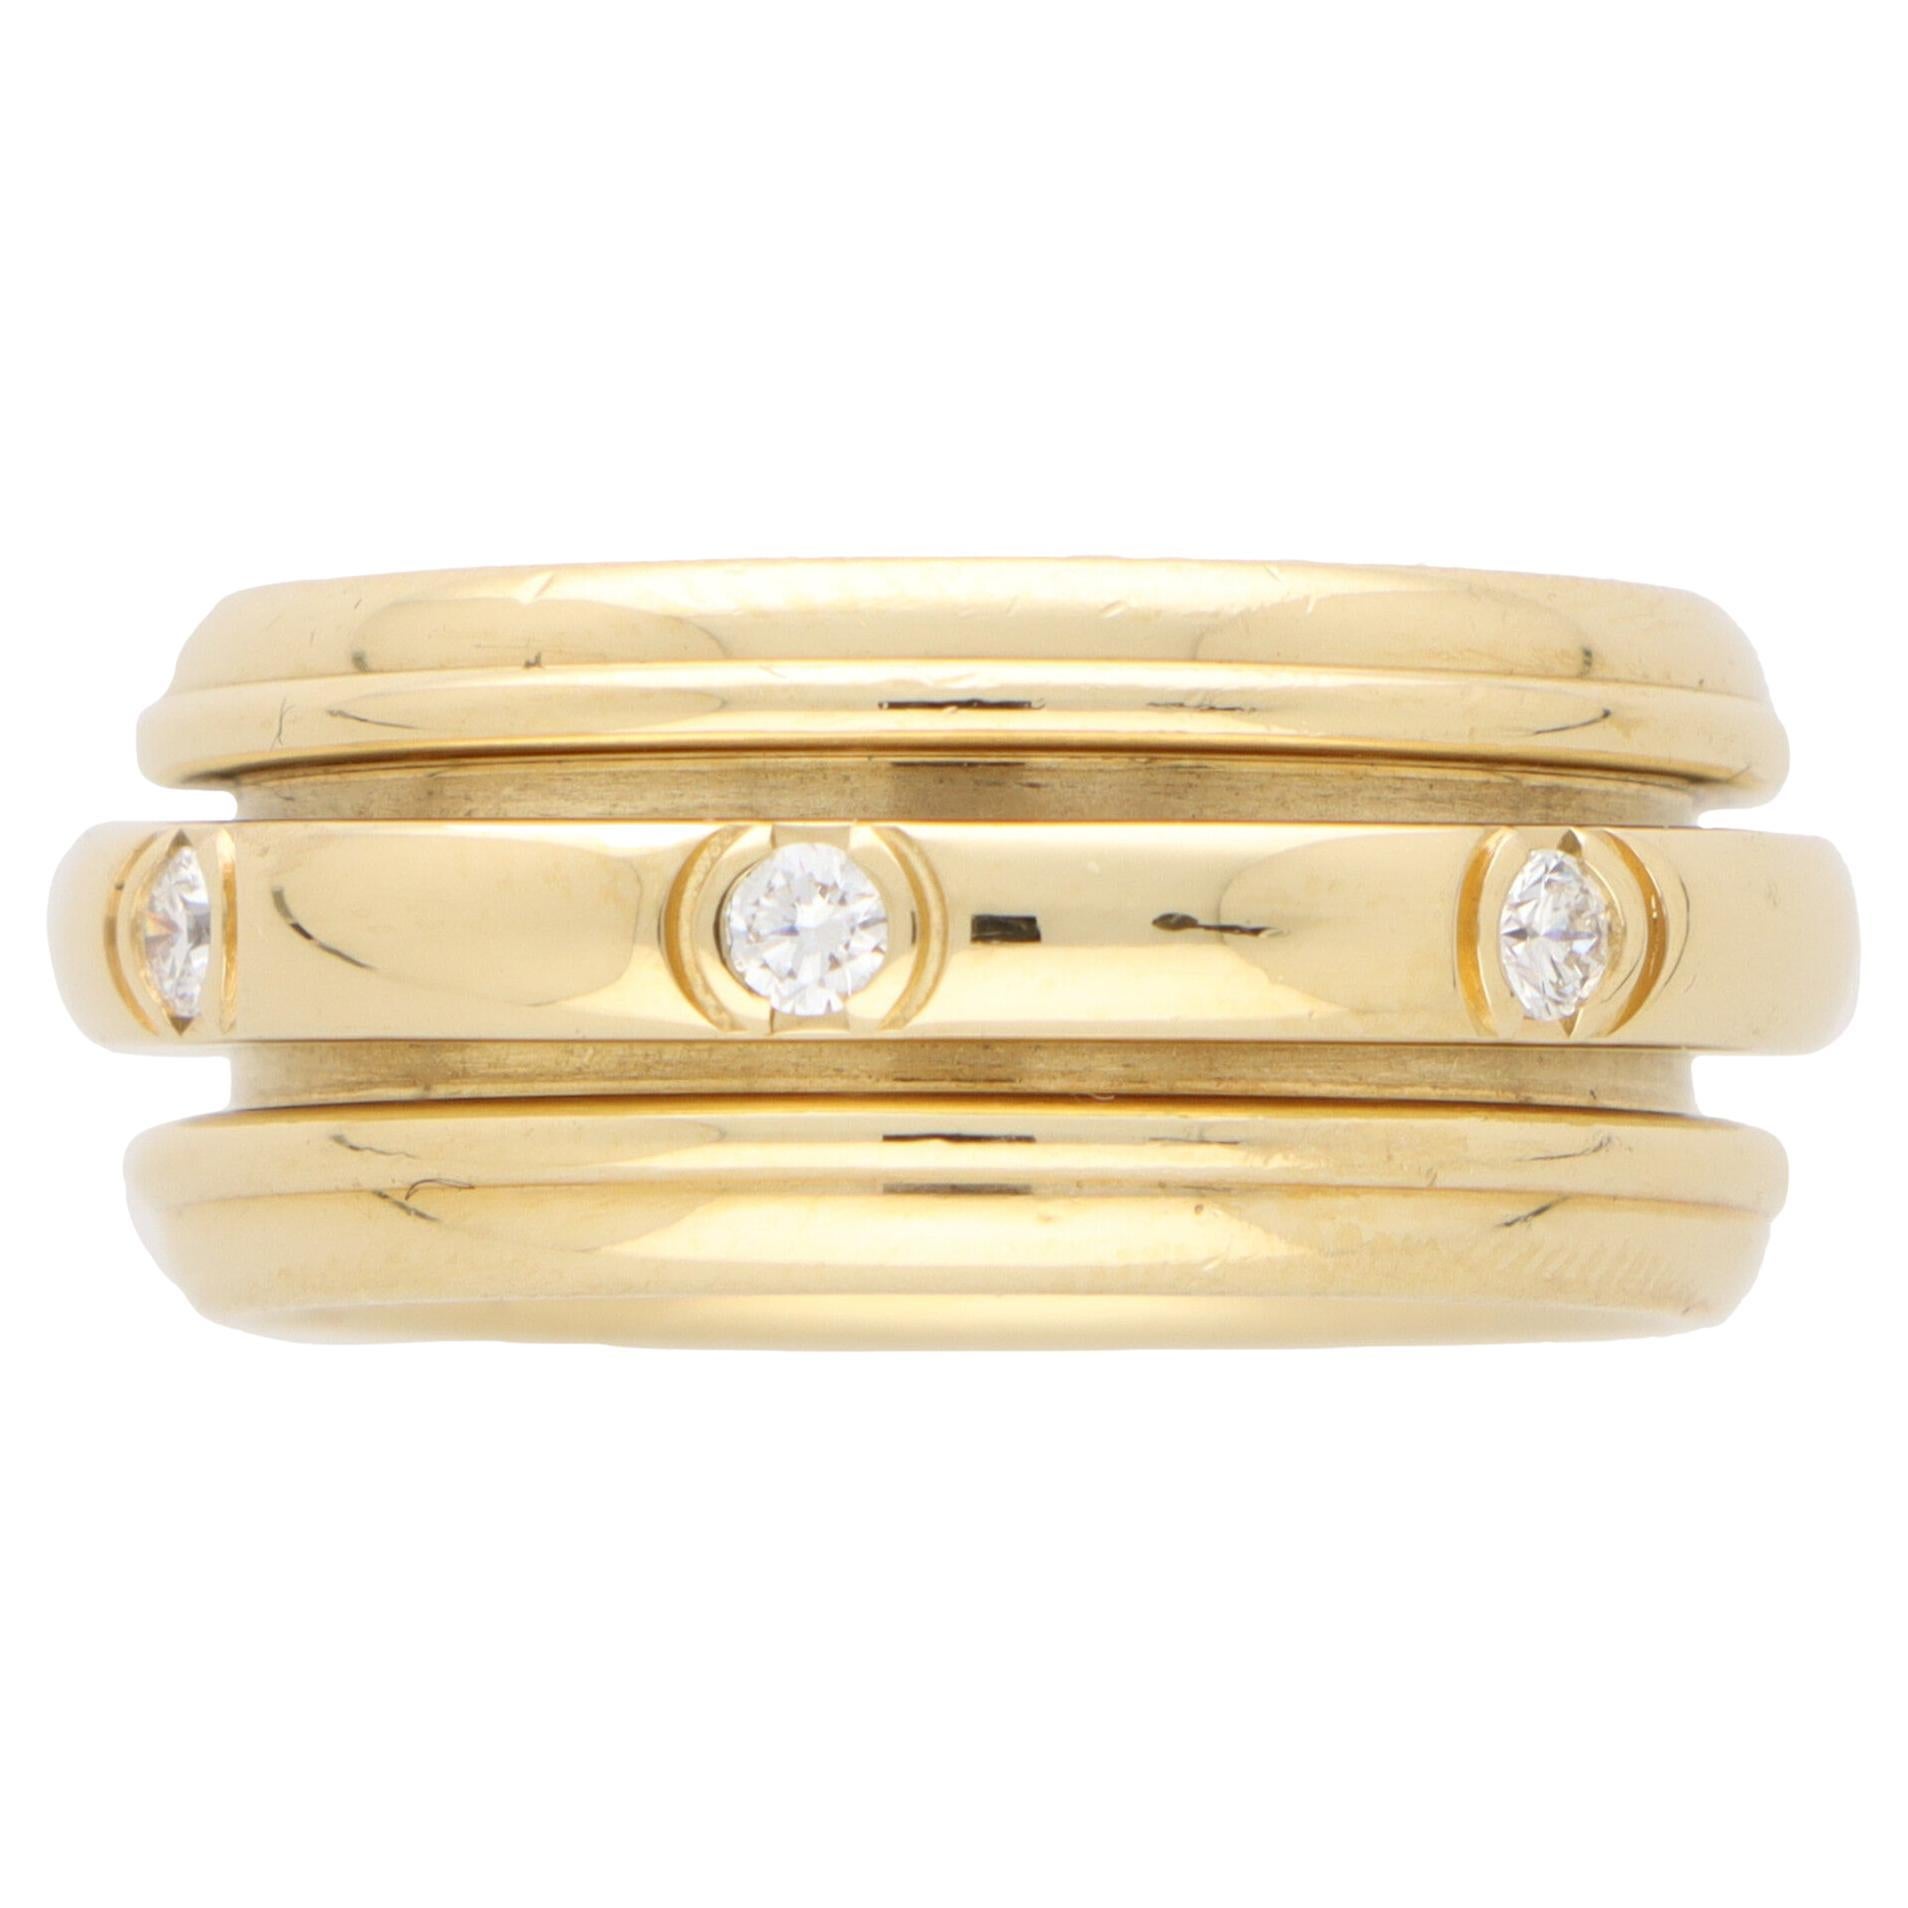 Vintage Piaget Possessions Diamond Band Ring Set in 18k Yellow Gold